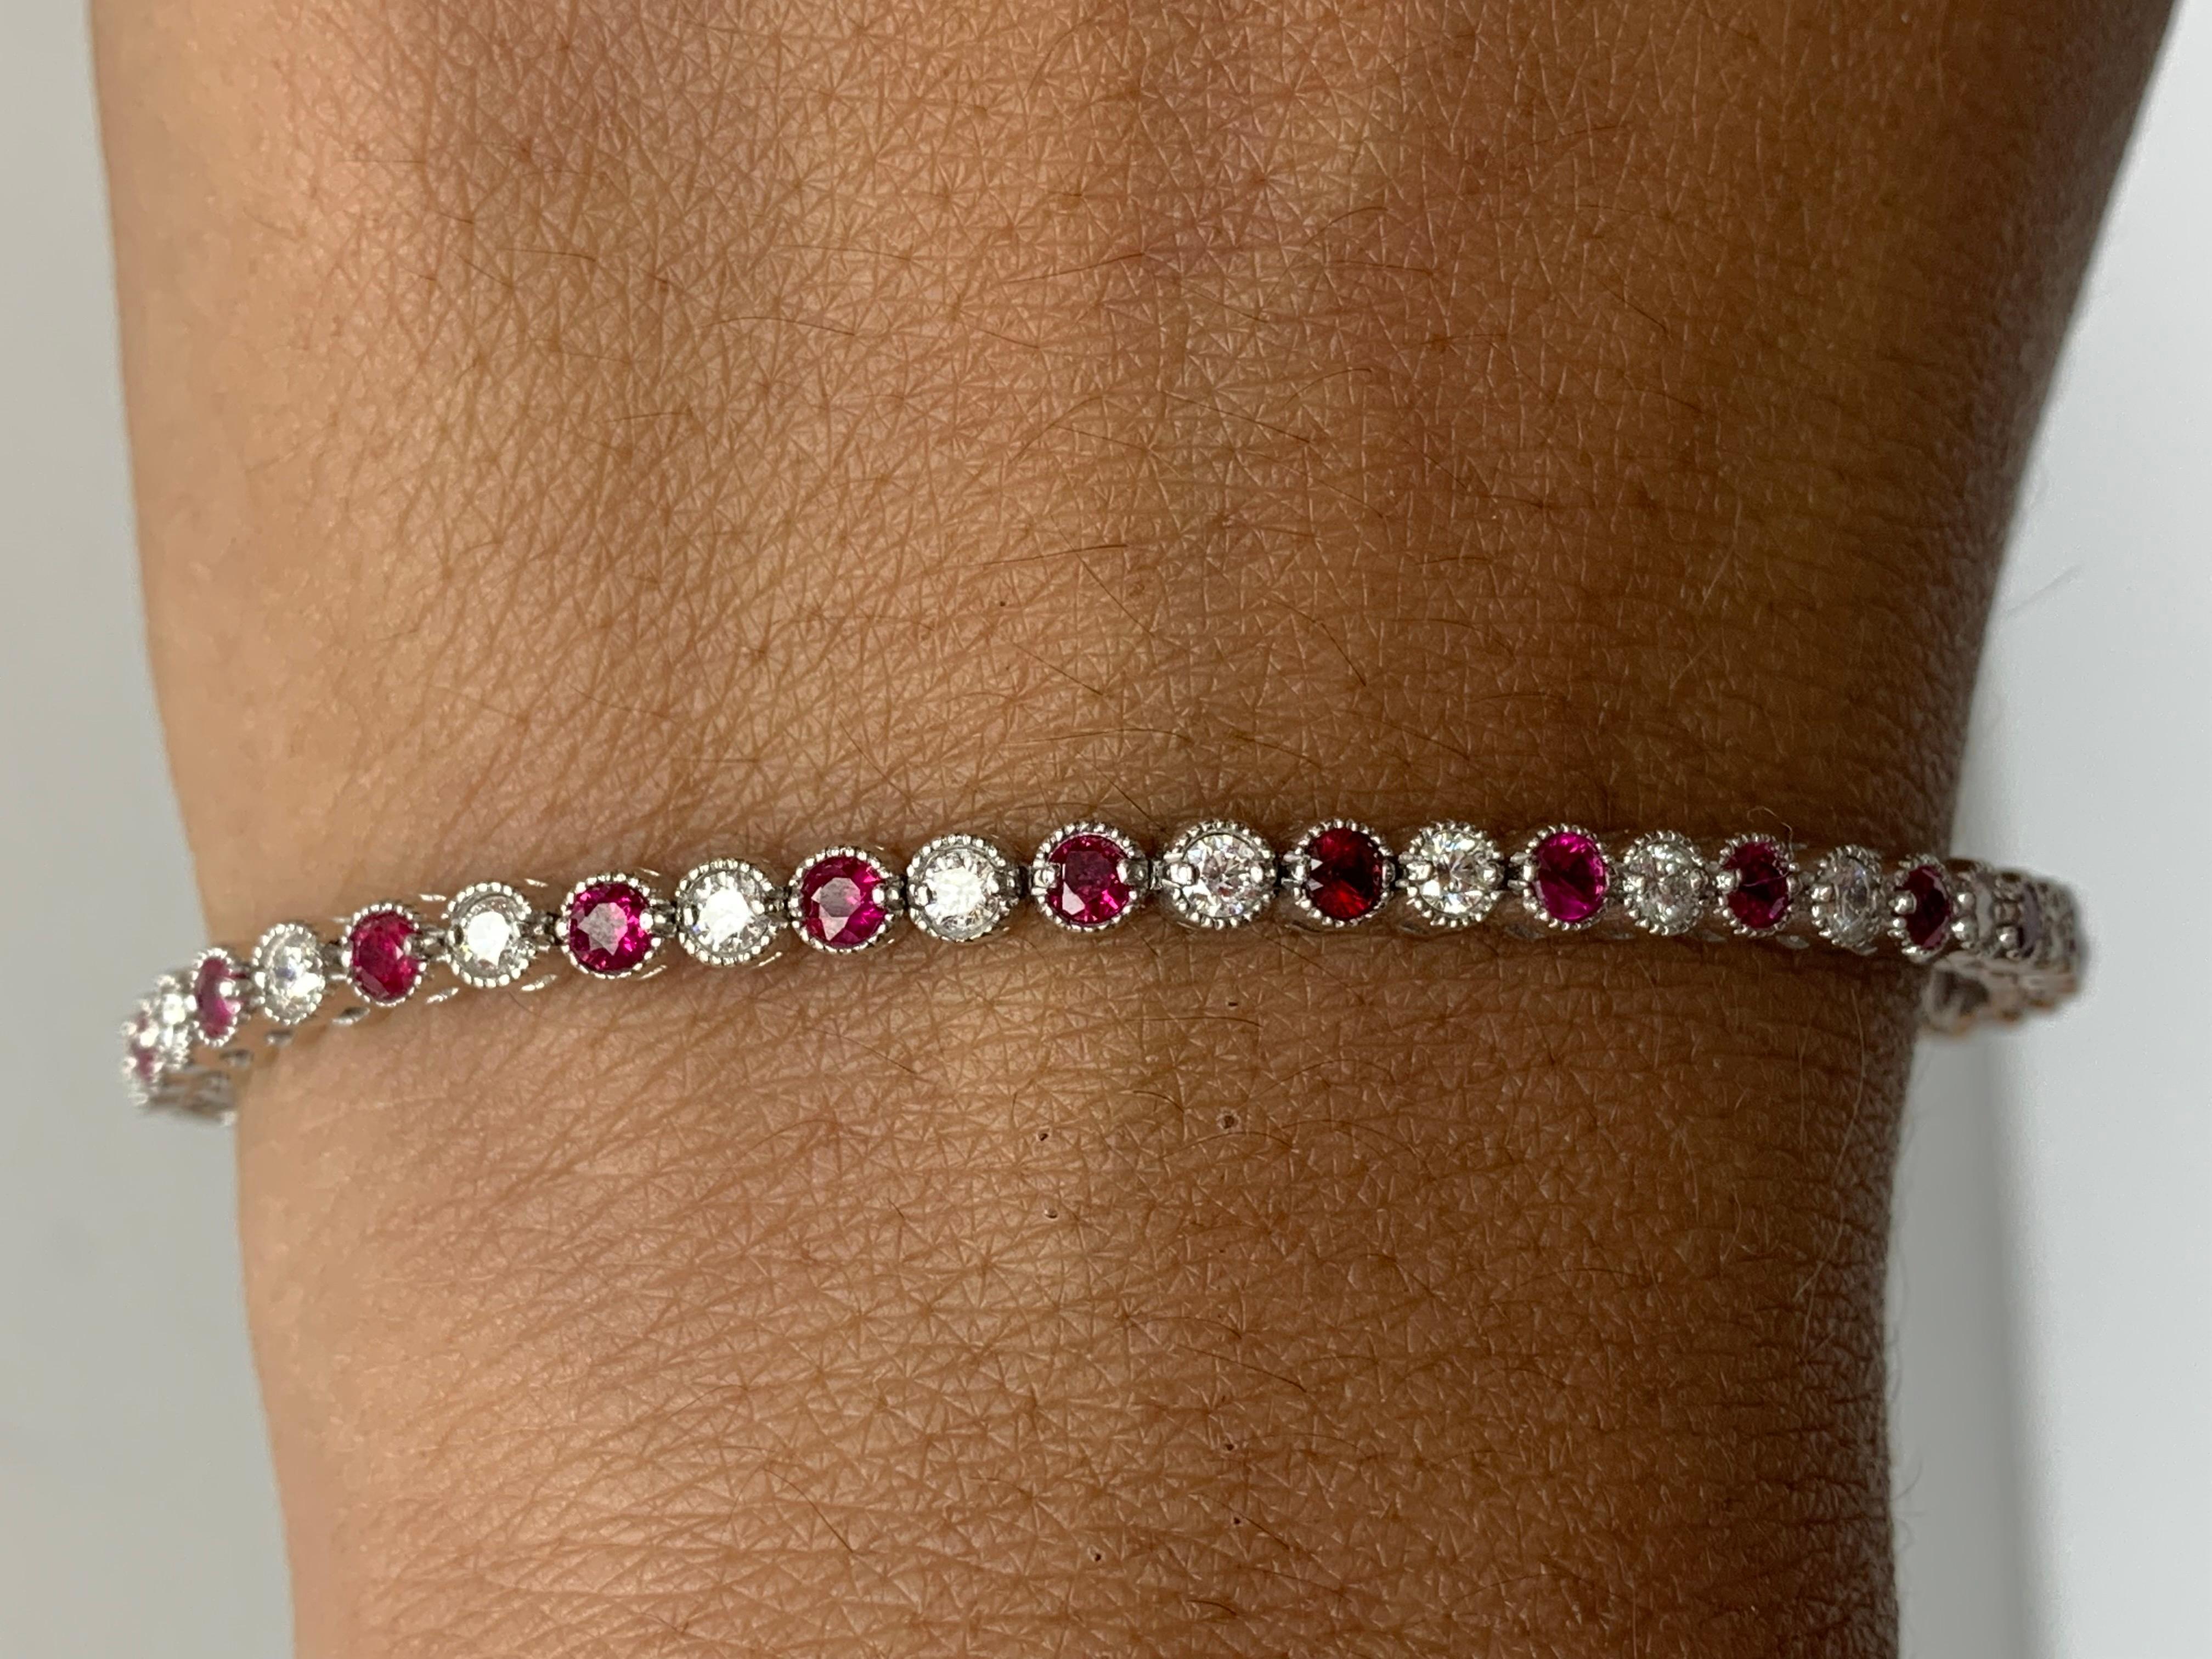 A classic tennis bracelet style showcasing a row of 26 round brilliant diamonds set alternately with 26 lush red Rubies in a polished 14k rose gold mounting.  Diamonds weigh 1.30 carats total and rubies weigh 1.97 carats total.

Style is available